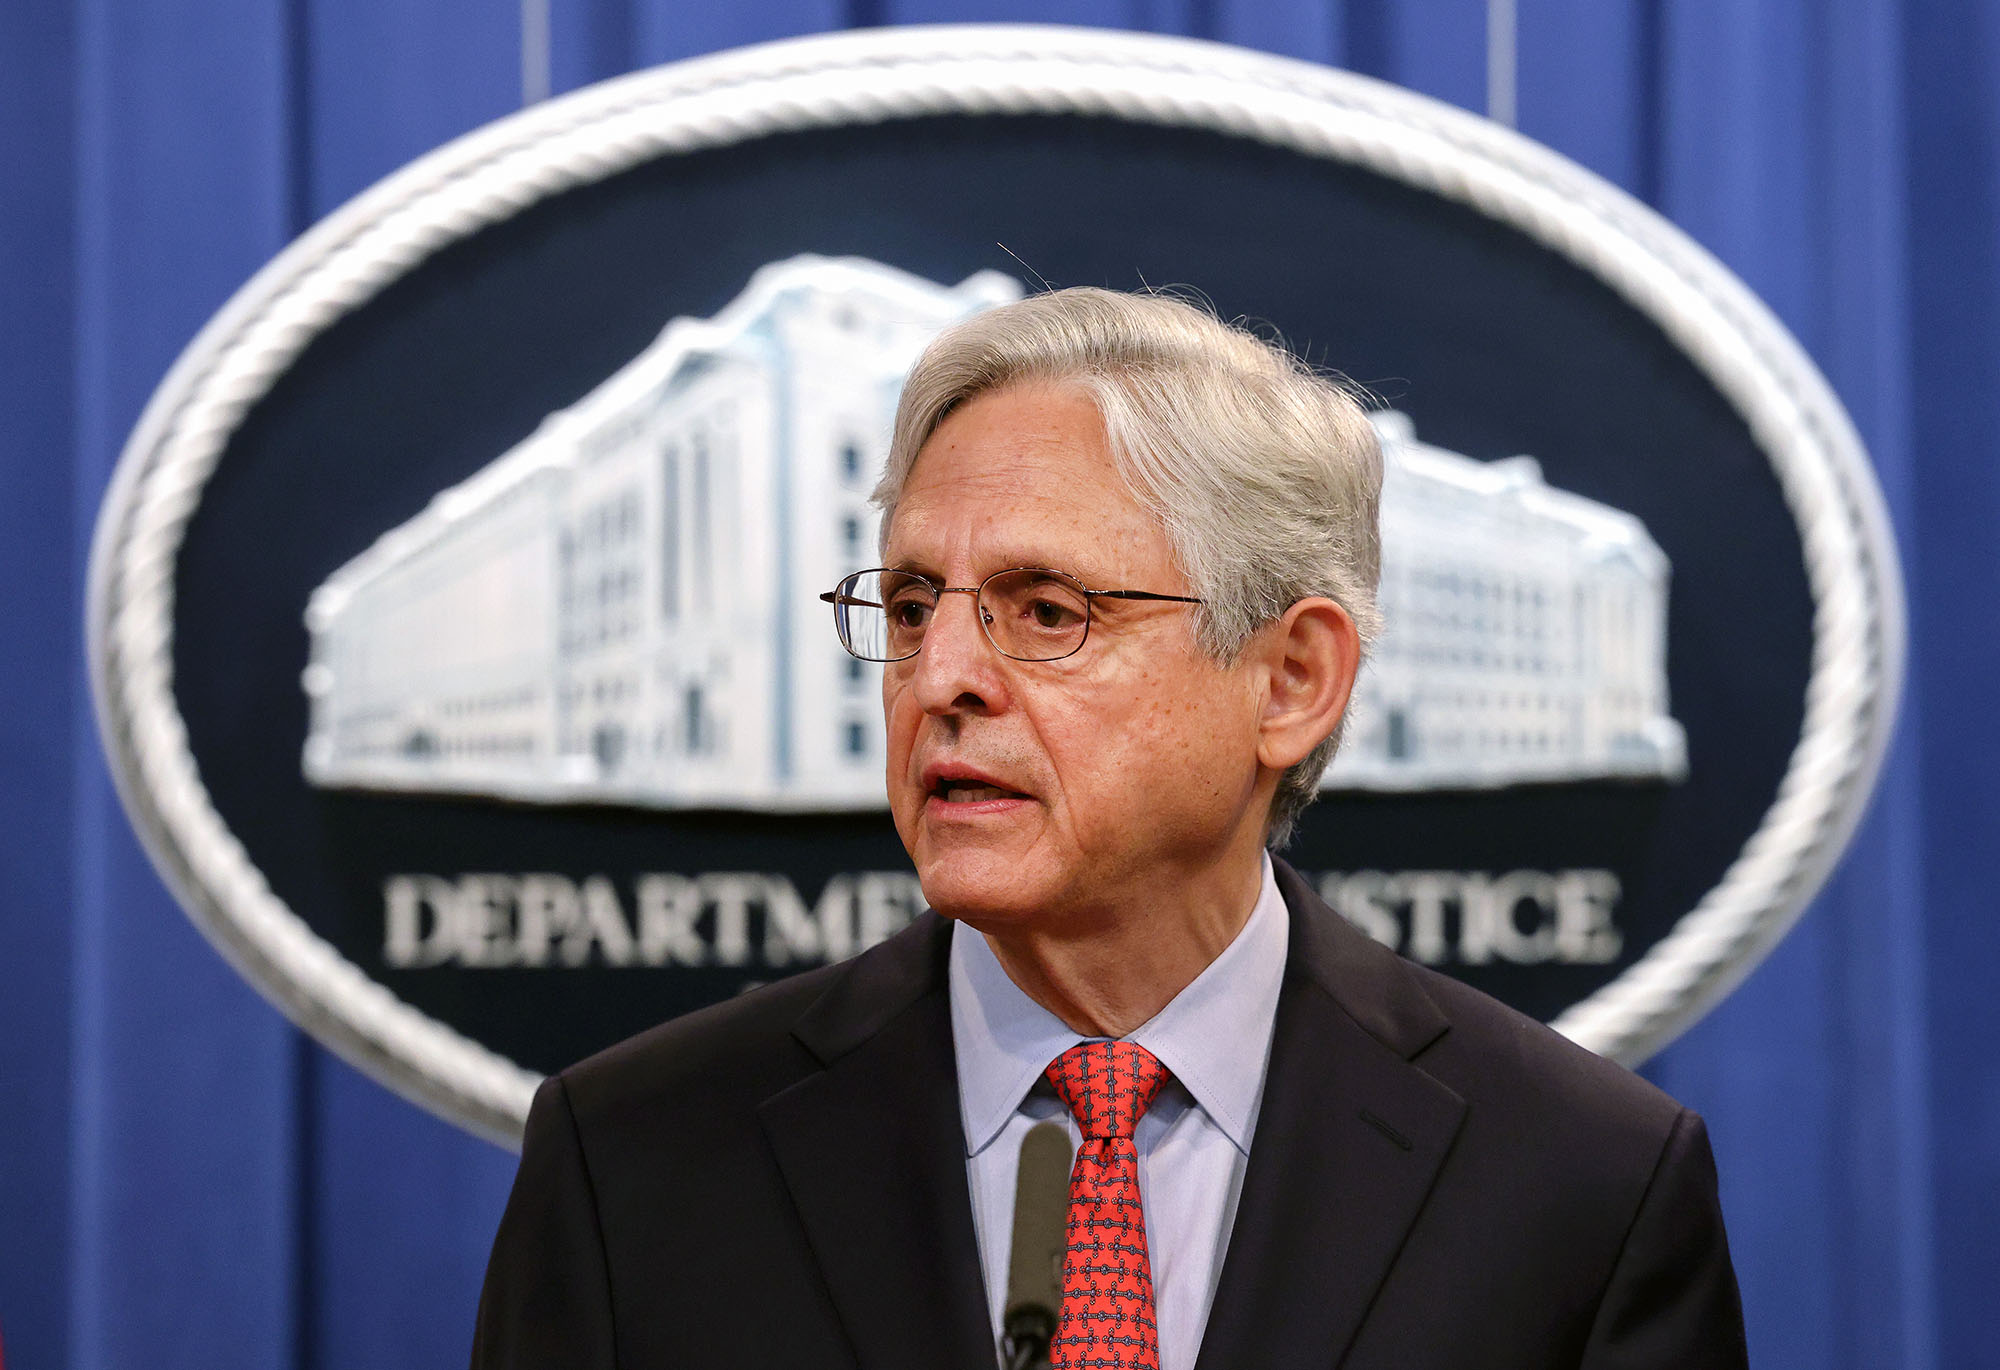 PHOTO: U.S. Attorney General Merrick Garland announces a federal investigation of the City of Phoenix and the Phoenix Police Department during a news conference at the Department of Justice in Washington, August 05, 2021.